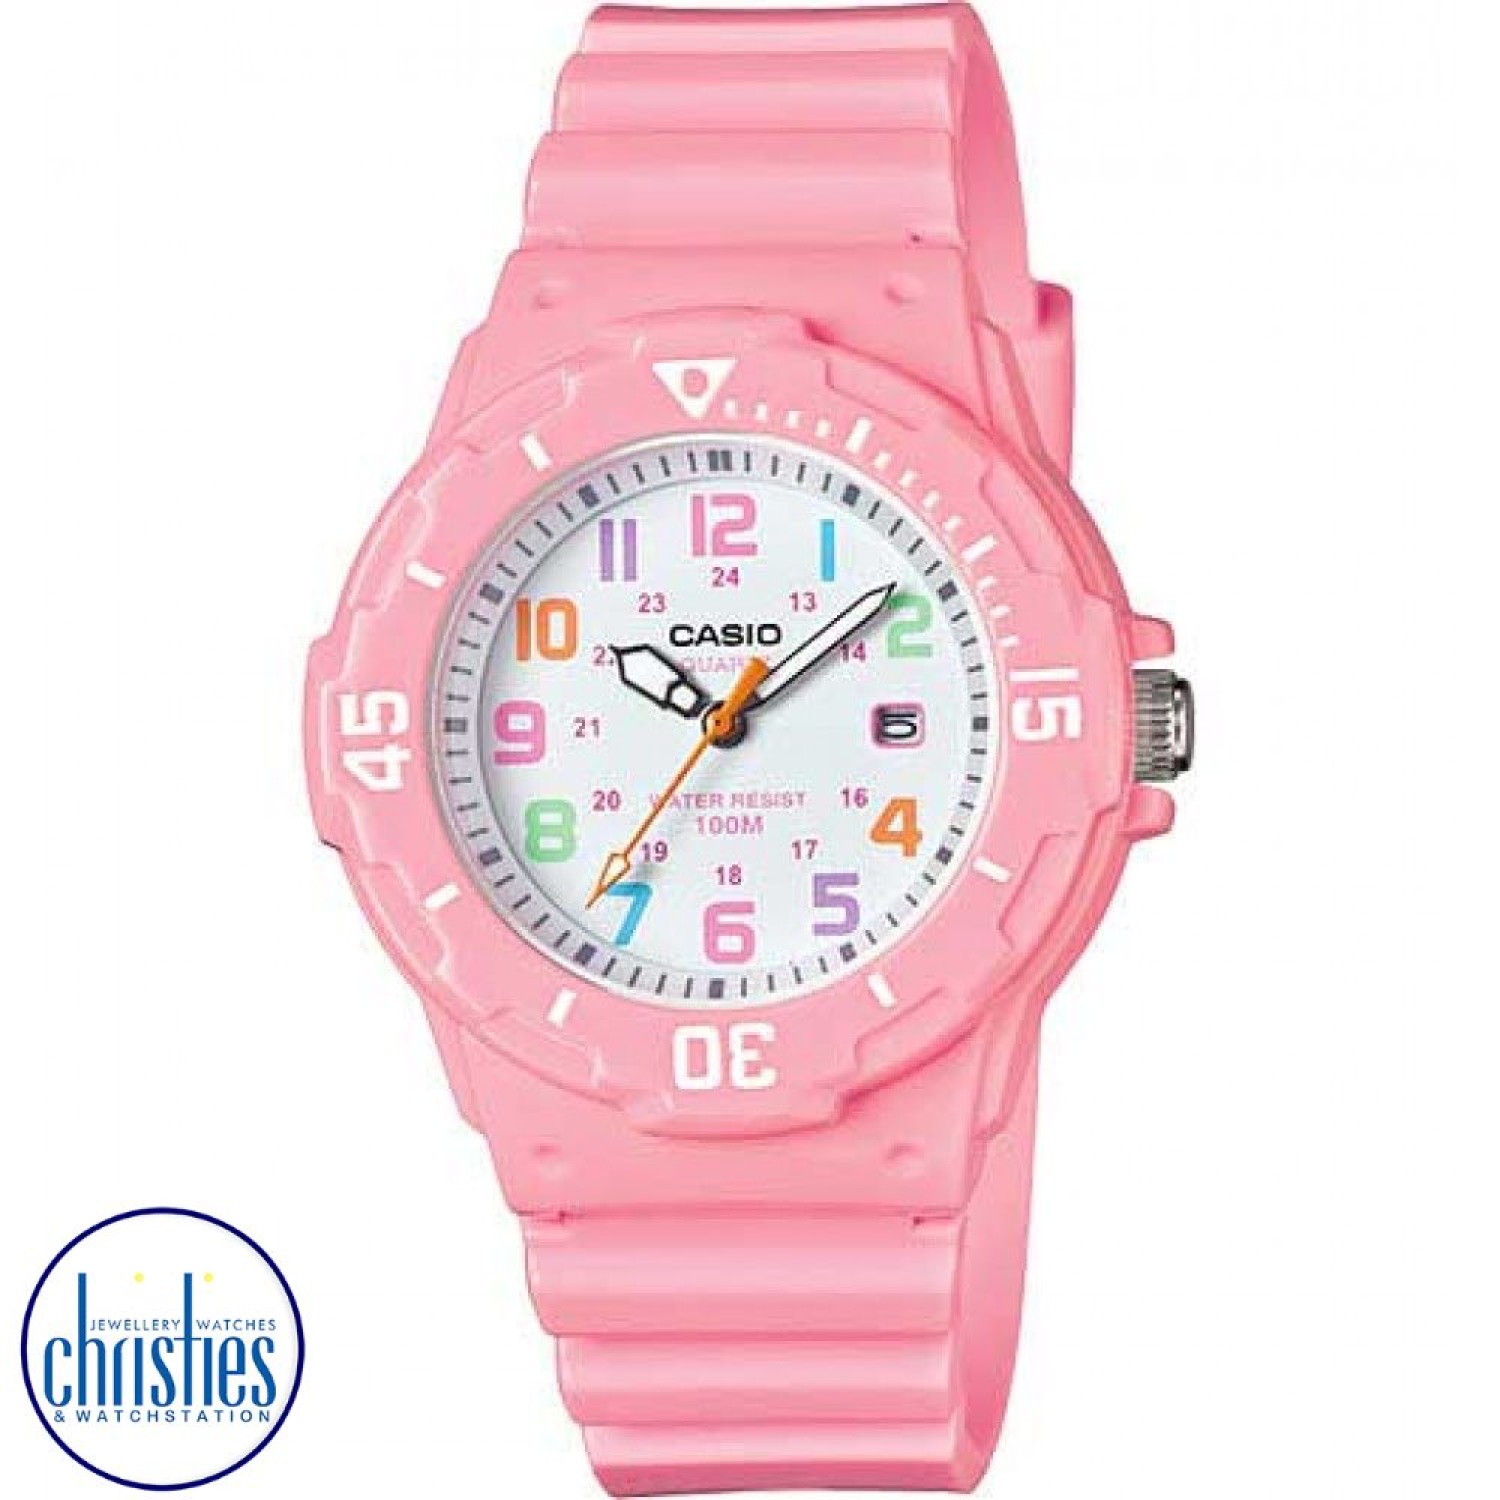 LRW200H-4B2 Casio 100 Metres Watch. Simple and compact, these dive inspired ladies and girls 3-hand analog timepieces feature 100 metres water resistance, a bi-directional rotating bezel and date display. A gloss pink resin band analog watch with mult col